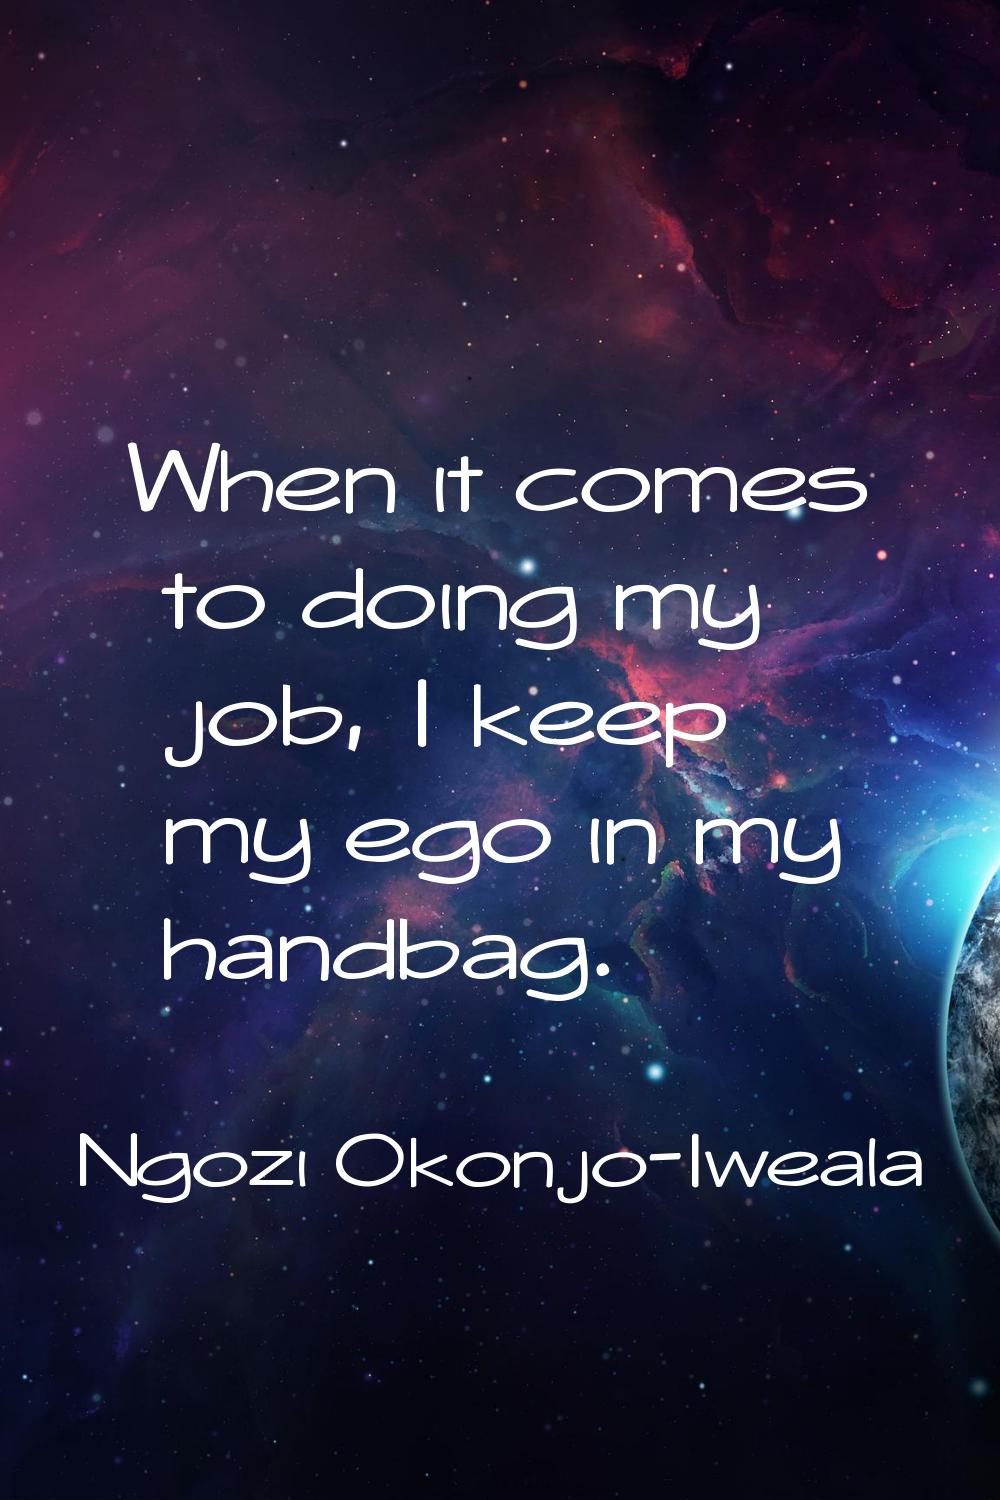 When it comes to doing my job, I keep my ego in my handbag.